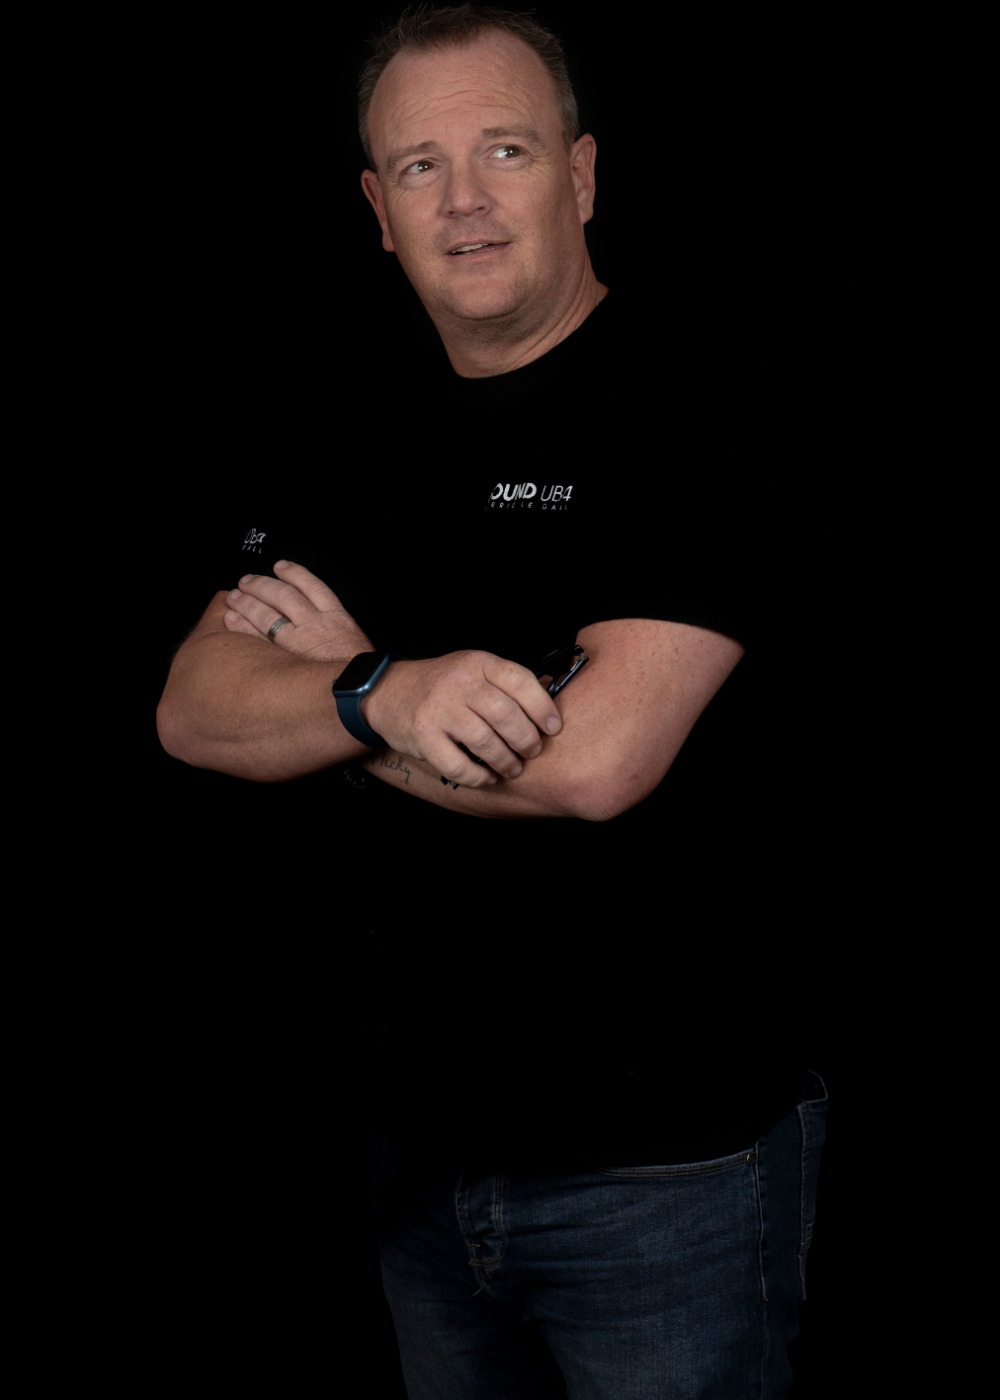 A man with crossed arms wearing a black t-shirt and jeans stands against a black background.